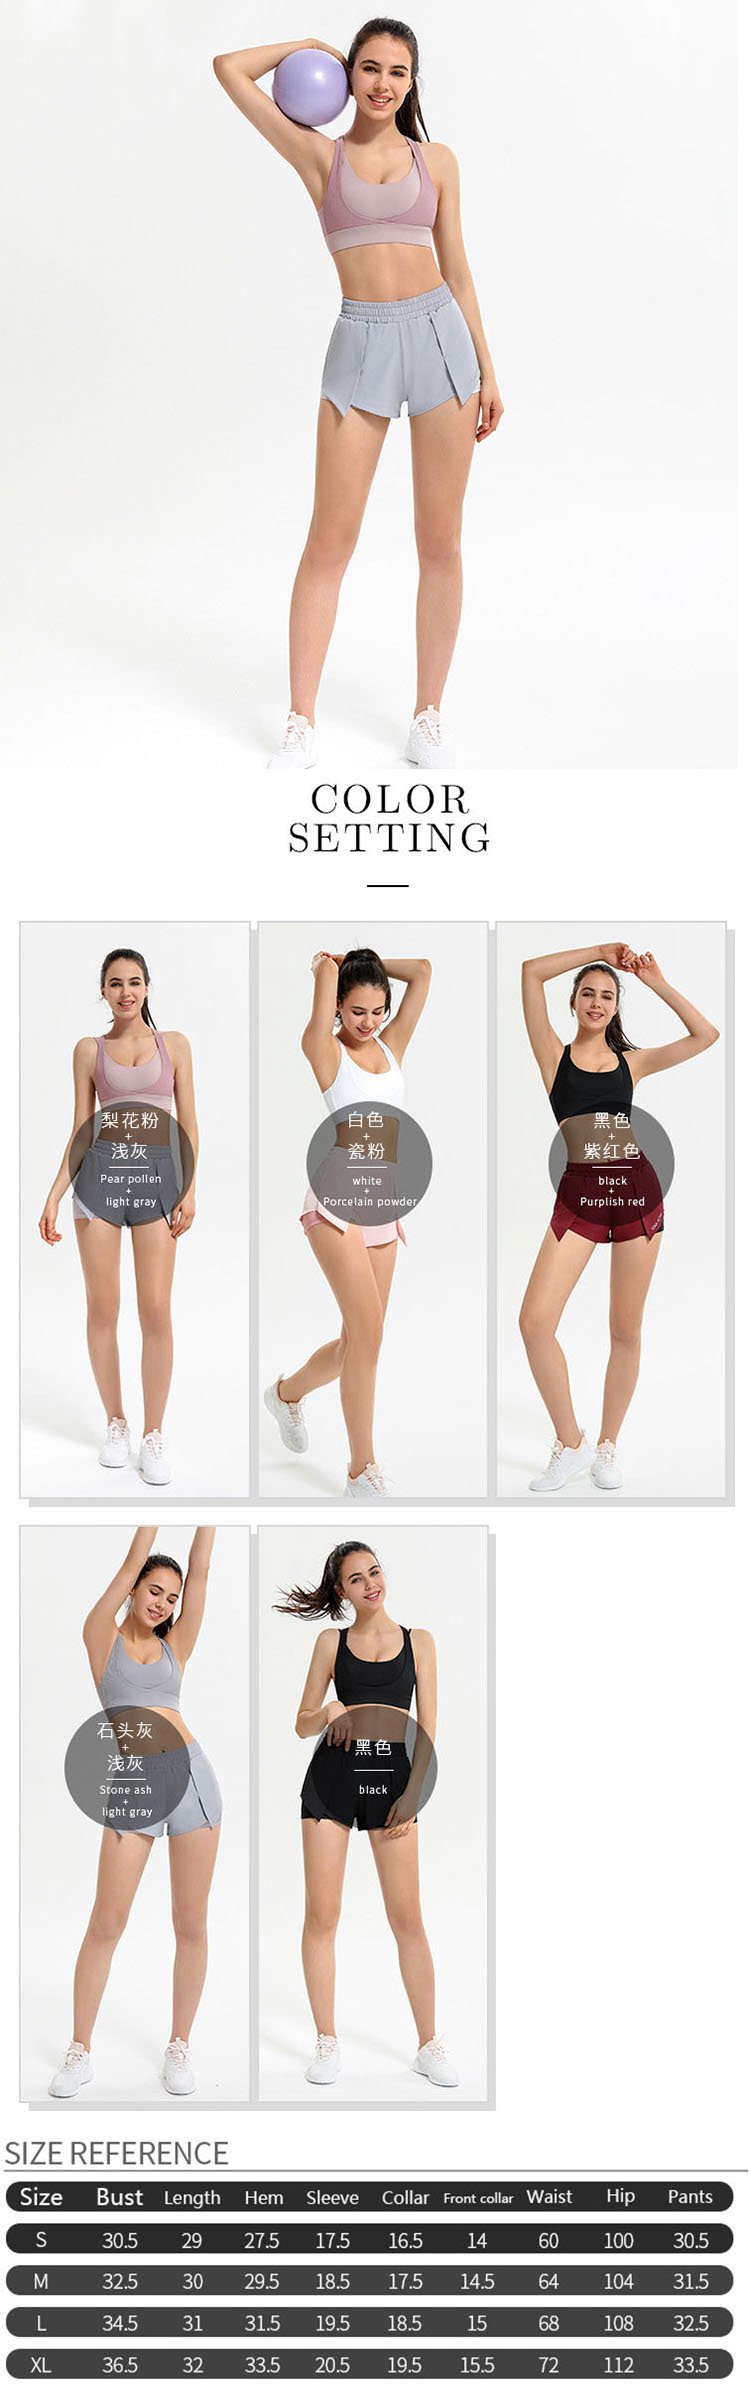 Women's athletic shorts features